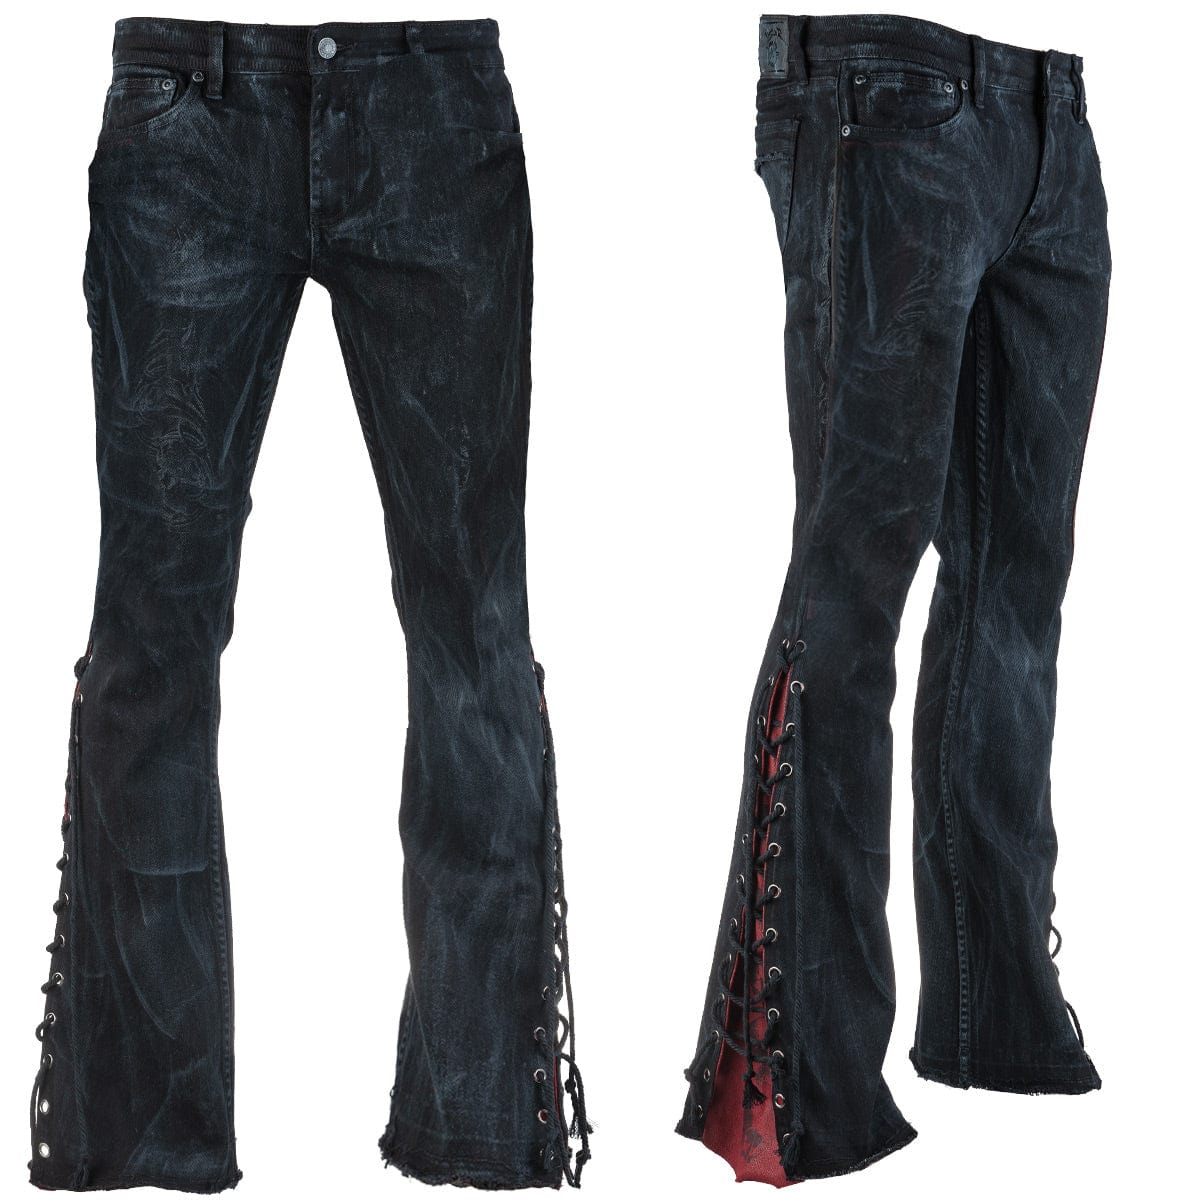 All-Star ⭐️ Design Leather Denim Stage Pants Rockstar Rock and Roll Fashion